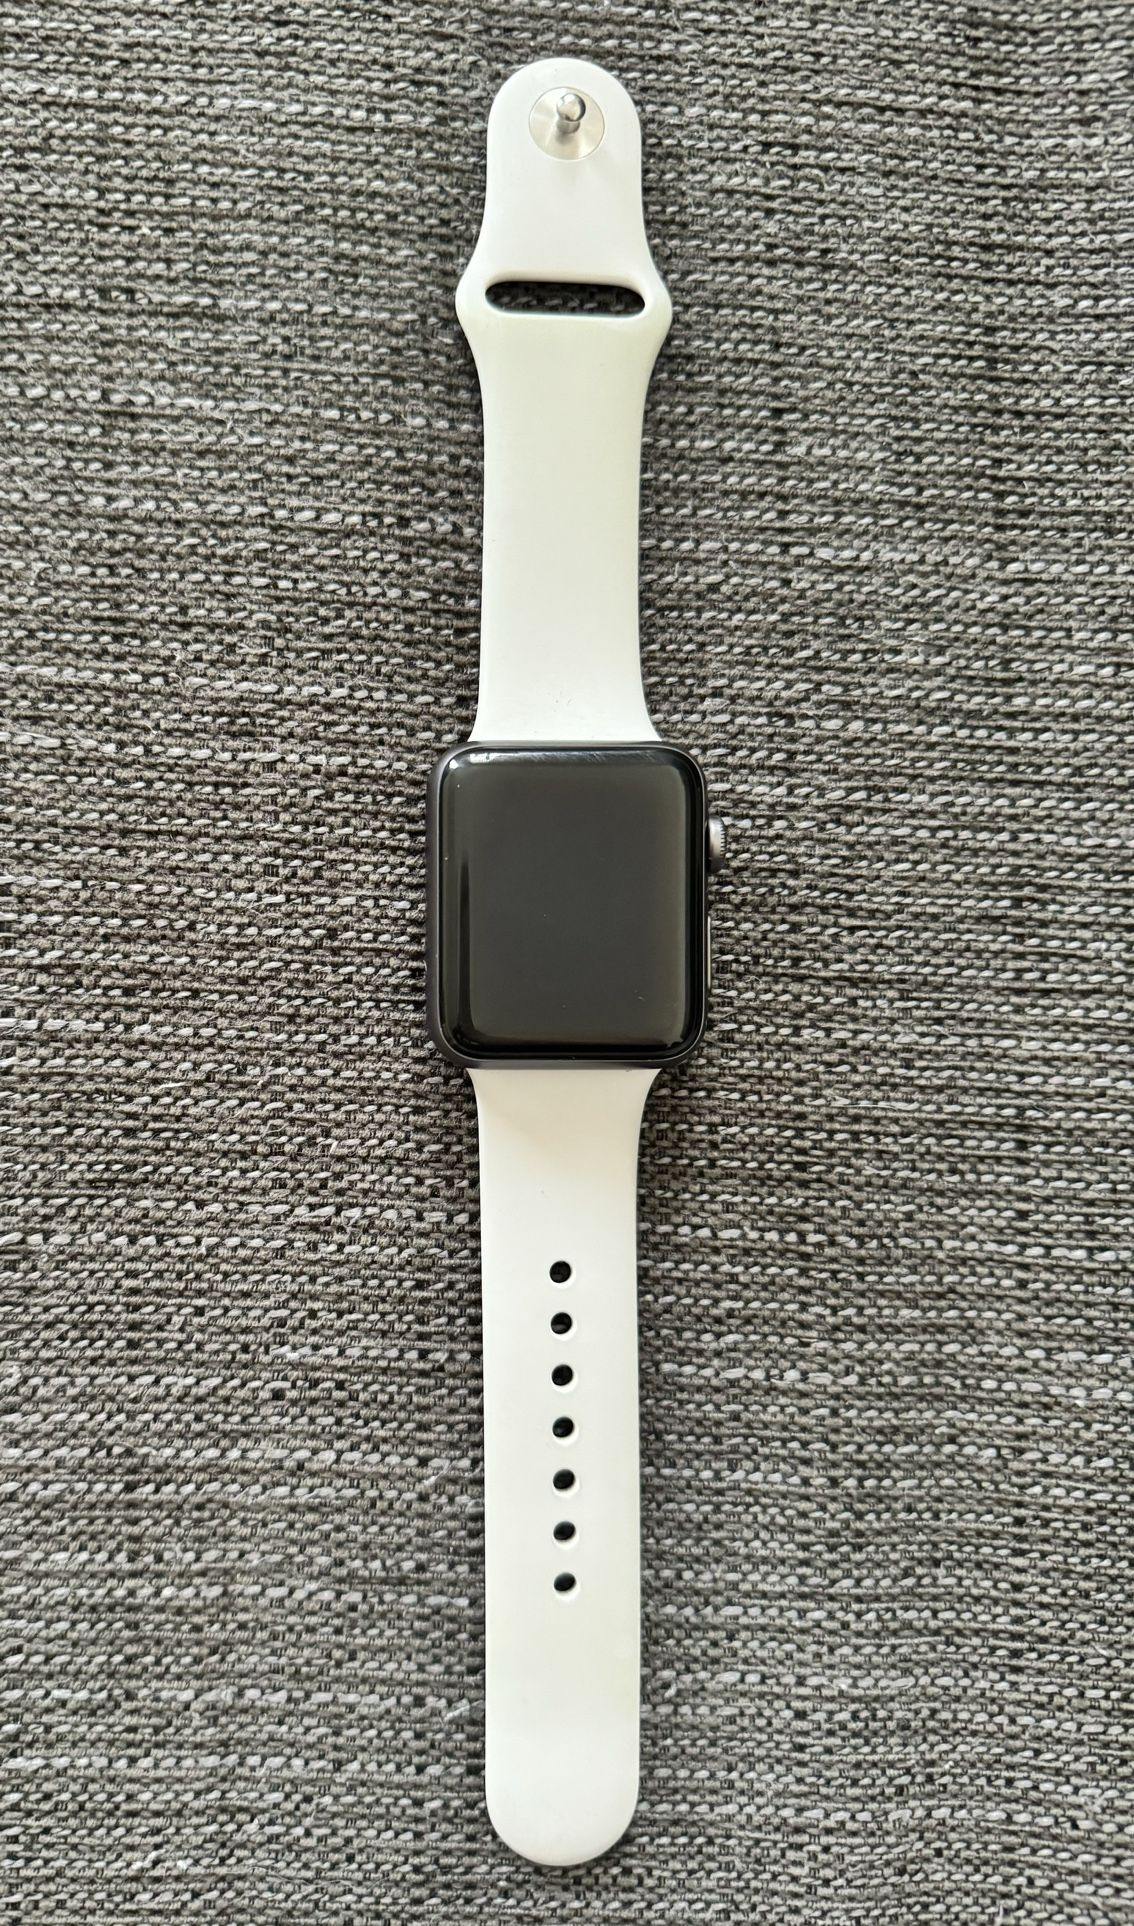 Apple Watch Series 3, 42mm, GPS + Cellular, Space Gray